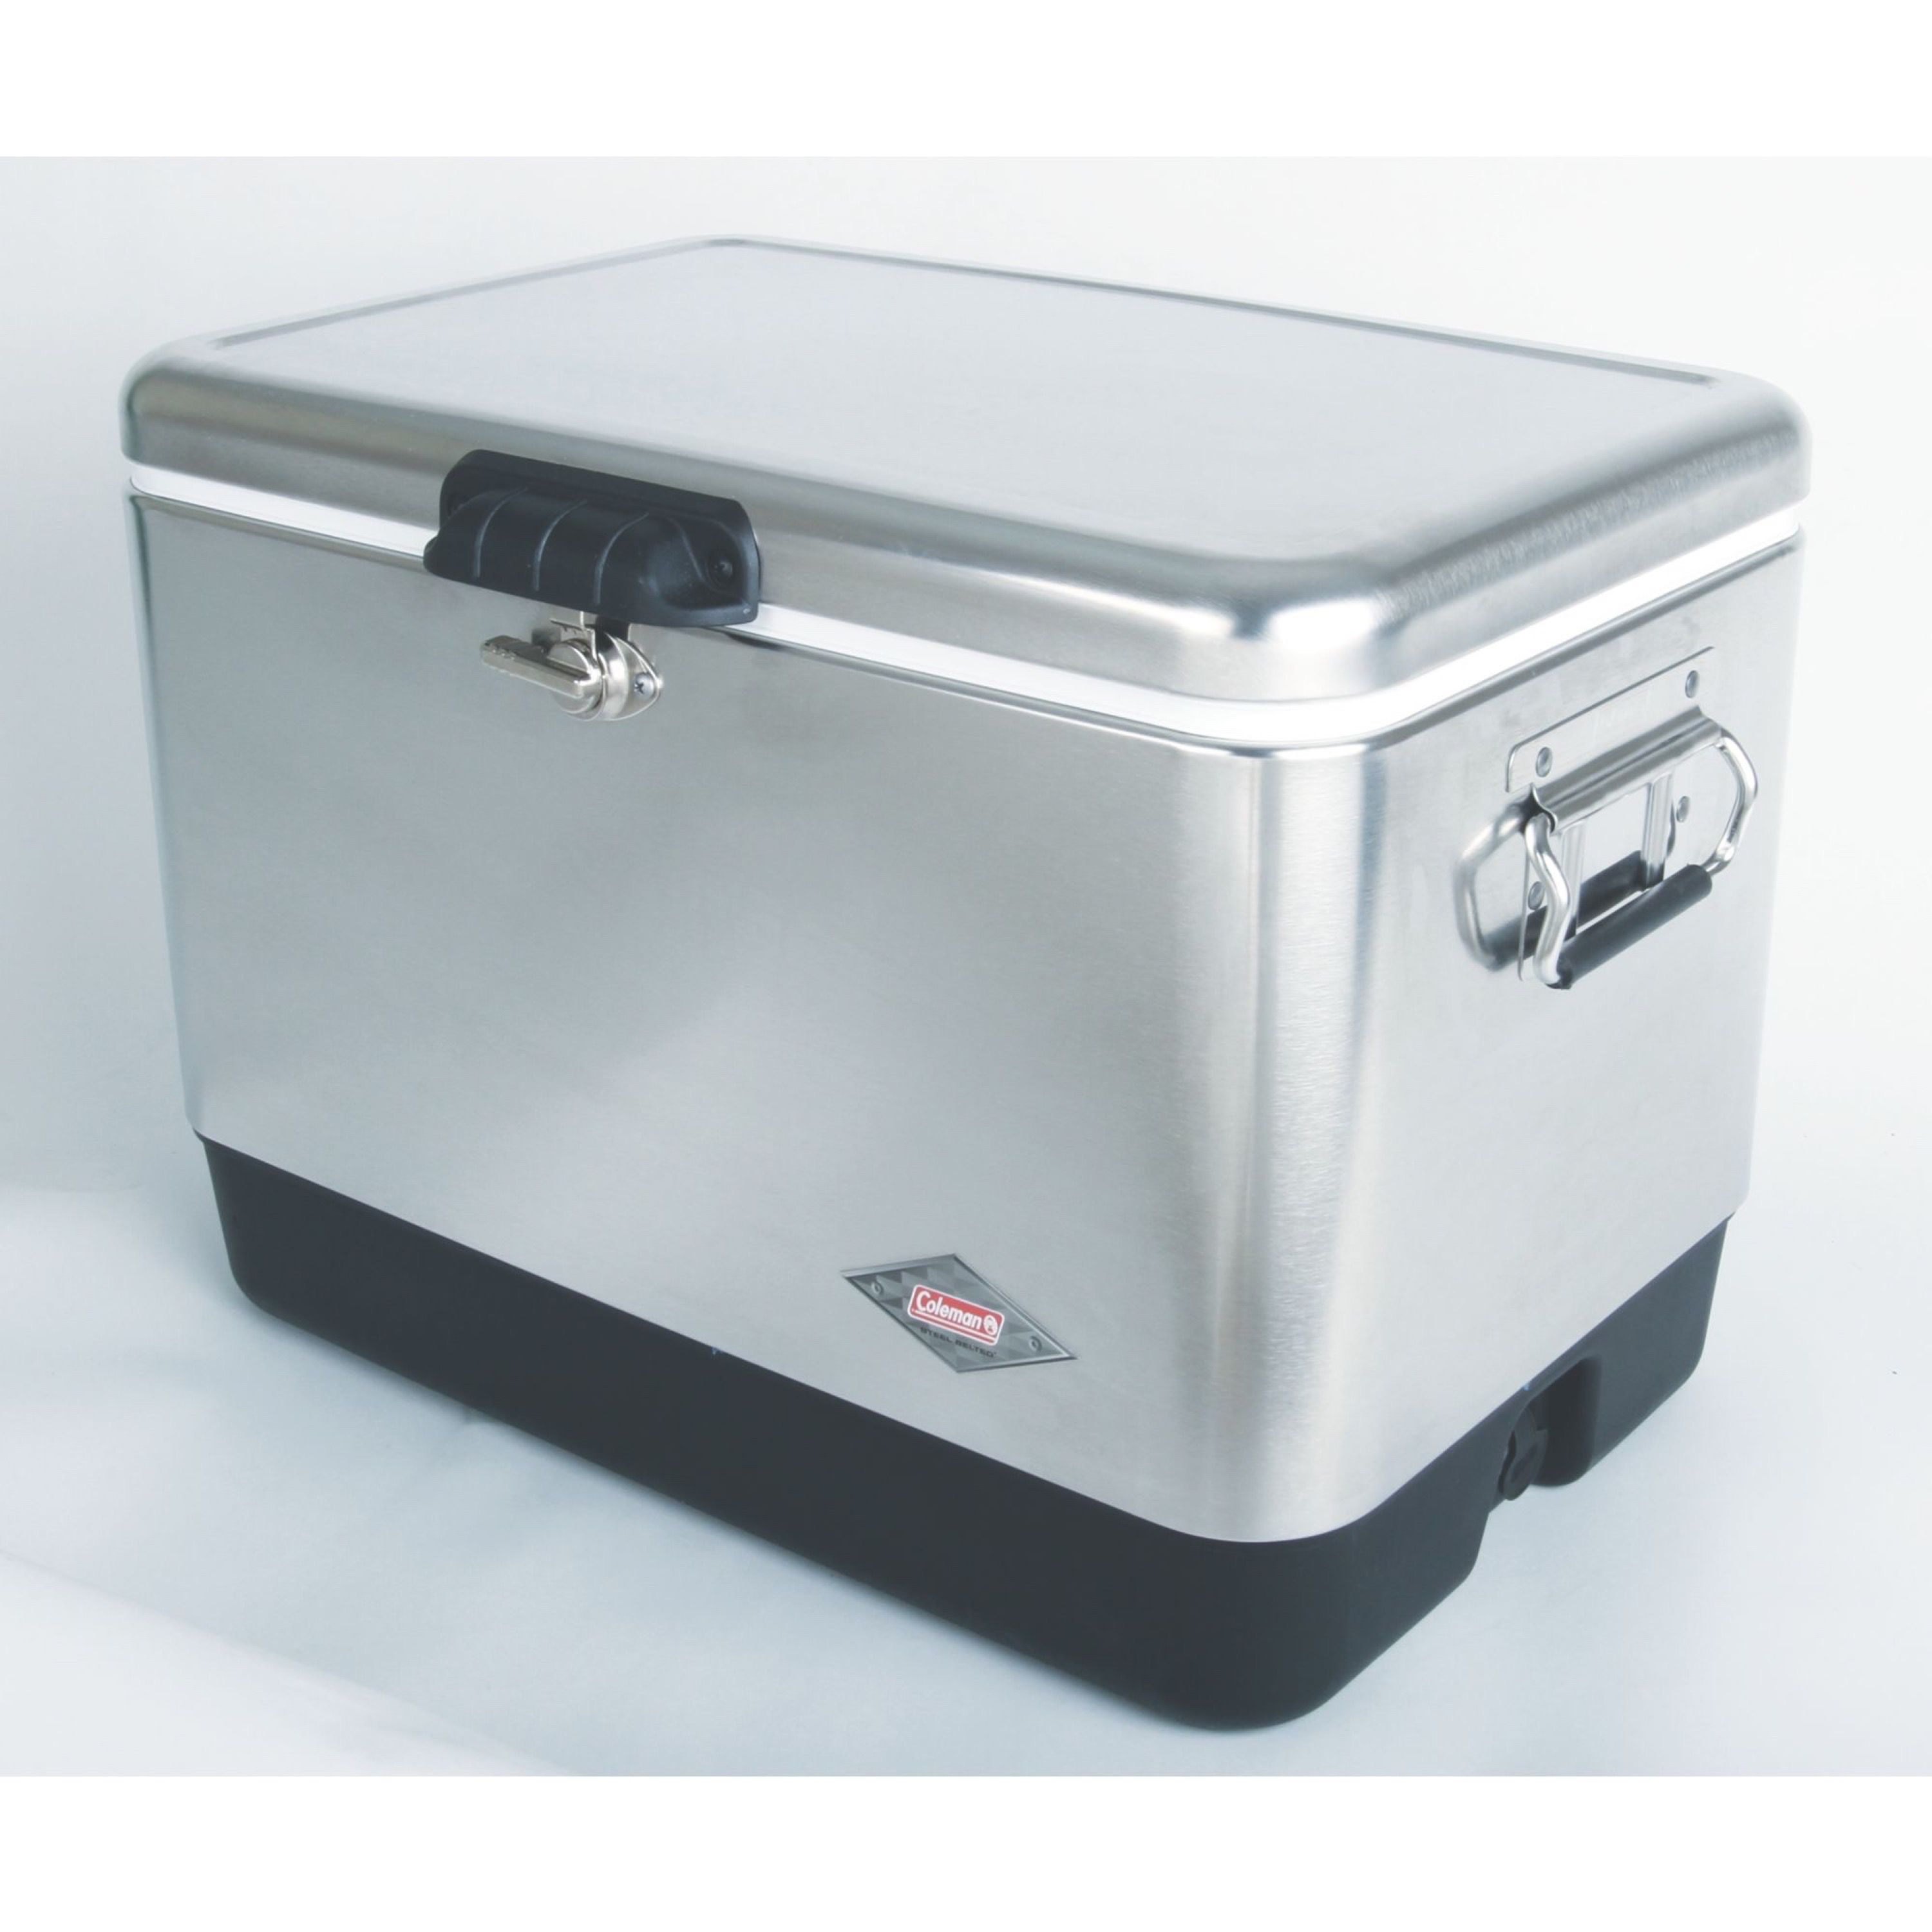 Coleman 54-Quart Steel Belted Cooler, Stainless Steel - image 4 of 7